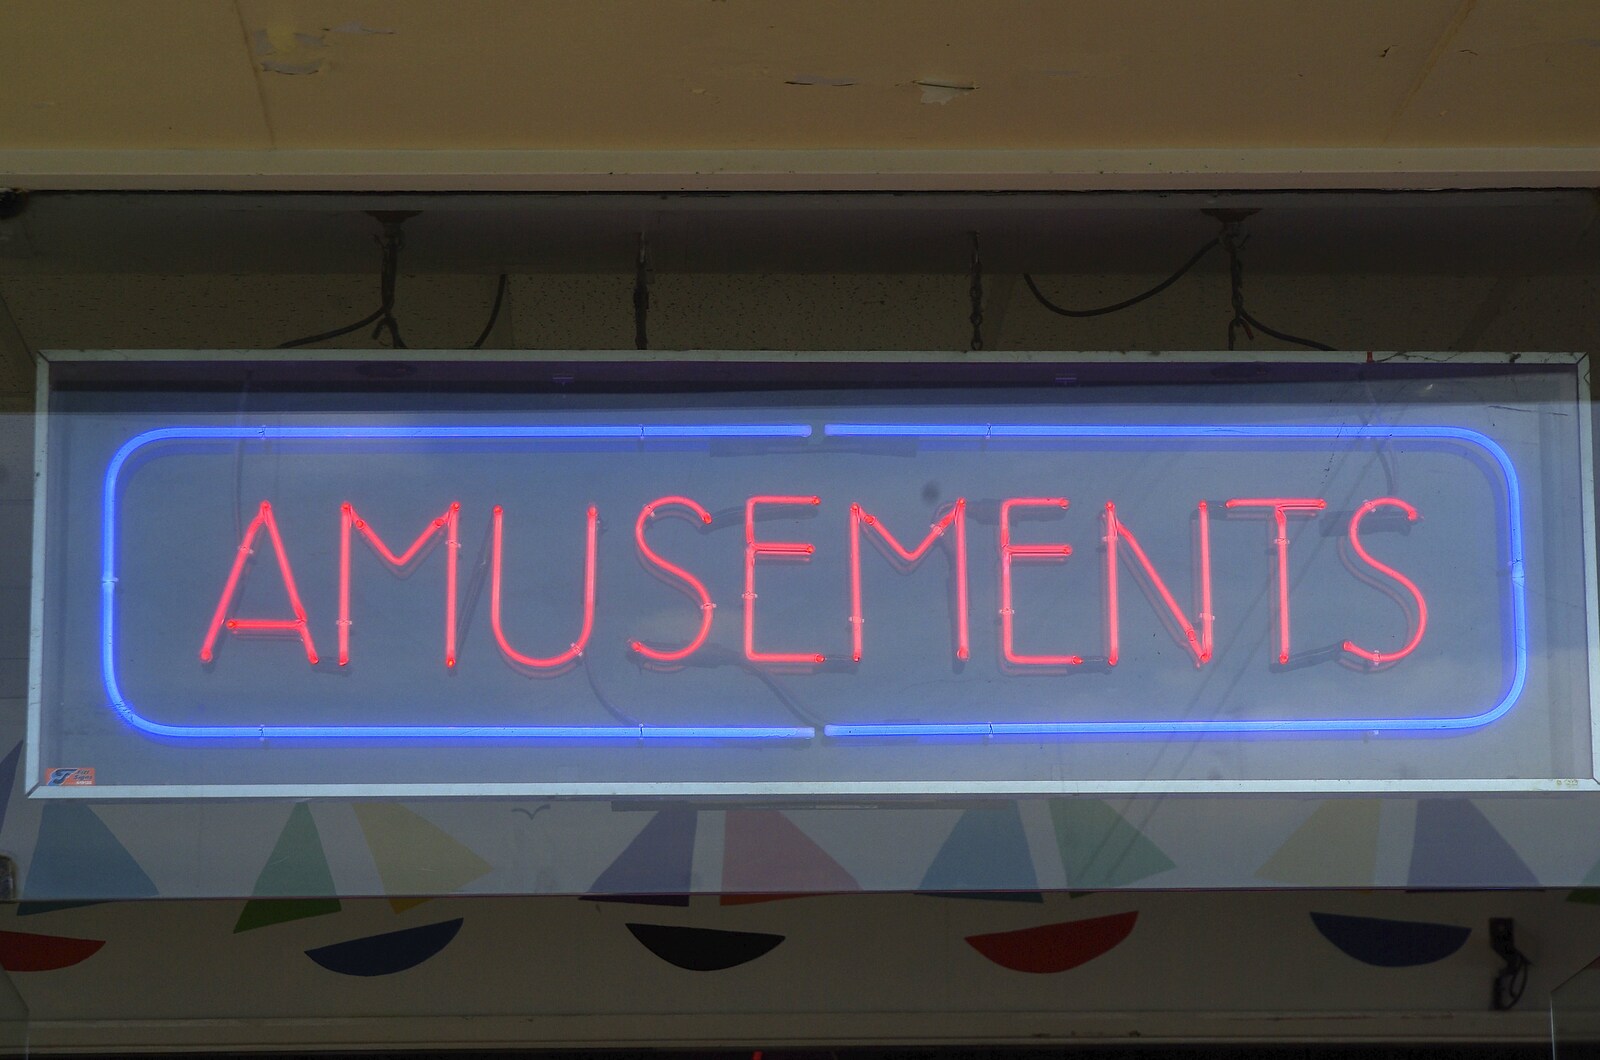 A neon amusements sign from Coldham's Traffic Light Destruction, and a Trip to the Pier, Cambridge and Southwold - 21st October 2007